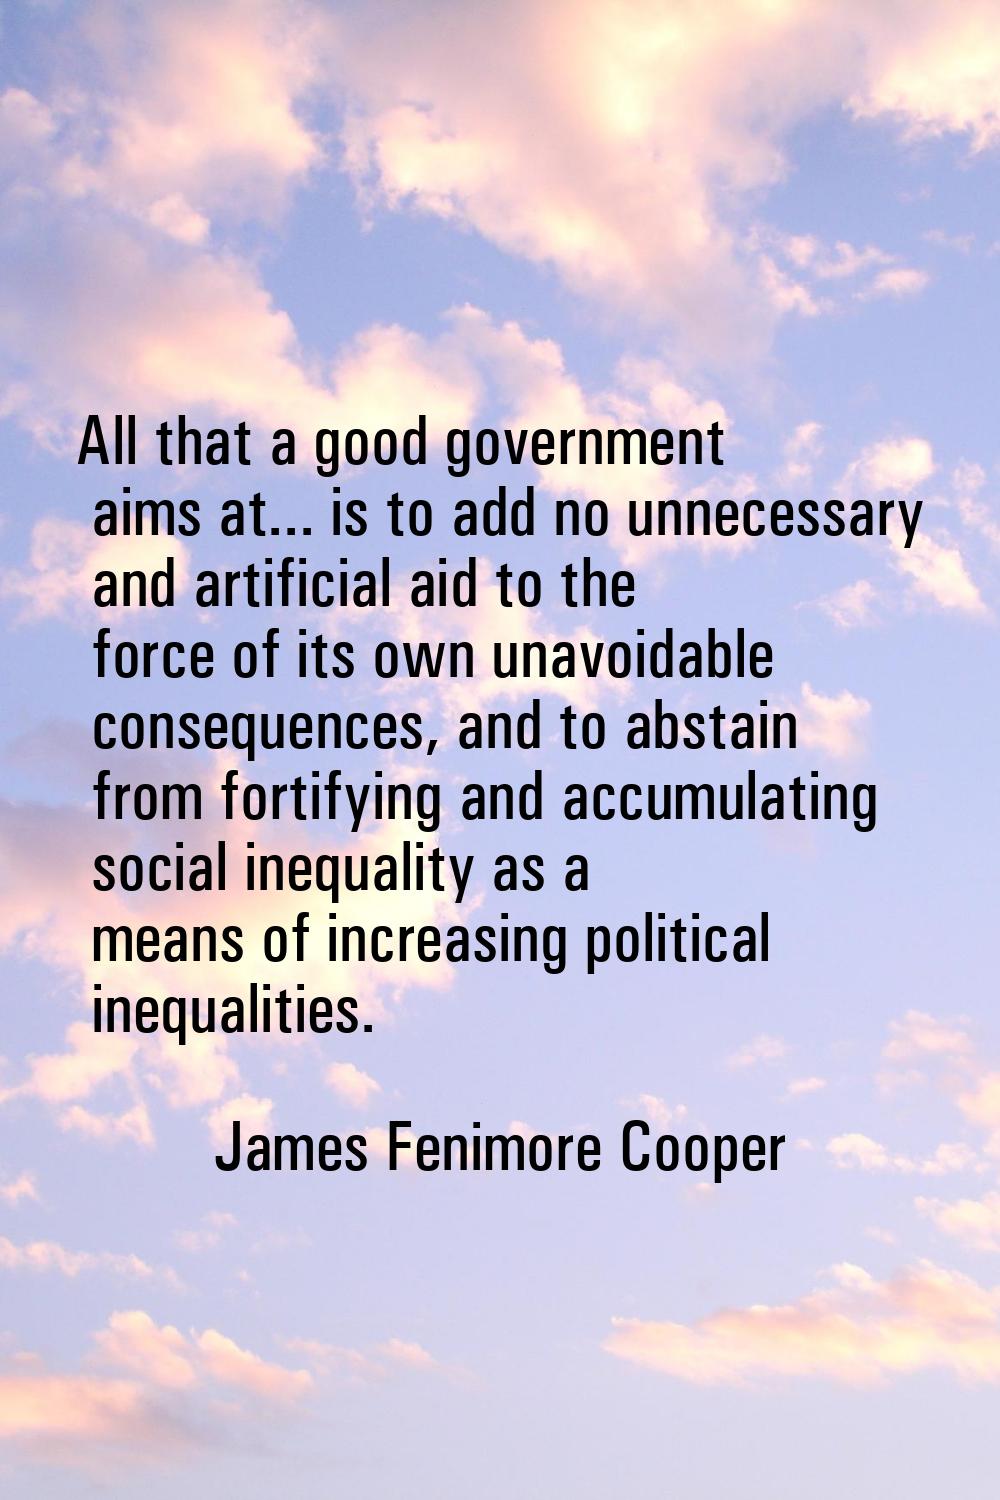 All that a good government aims at... is to add no unnecessary and artificial aid to the force of i